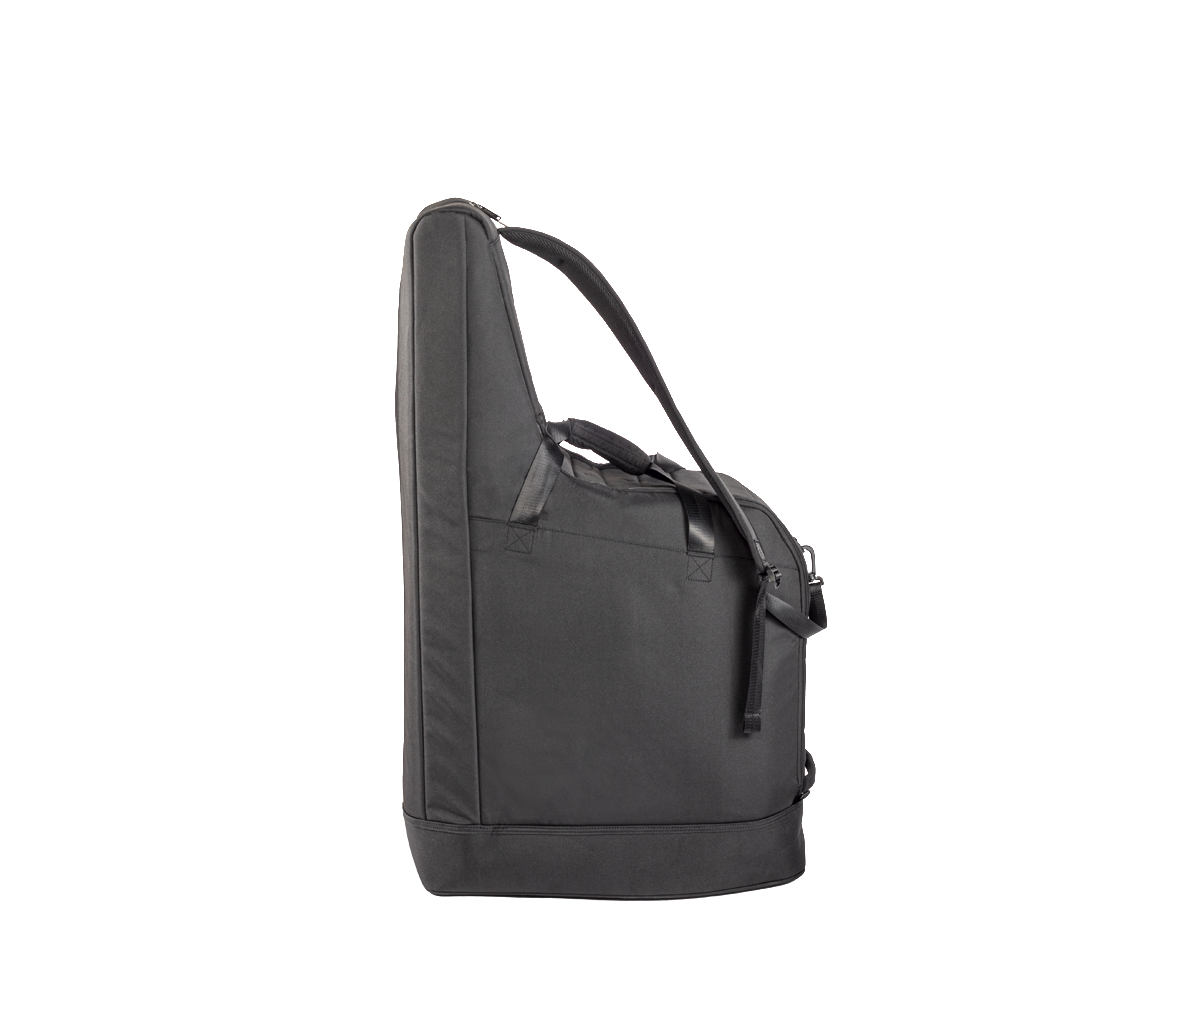 L1 Pro8 SystemBag lateral